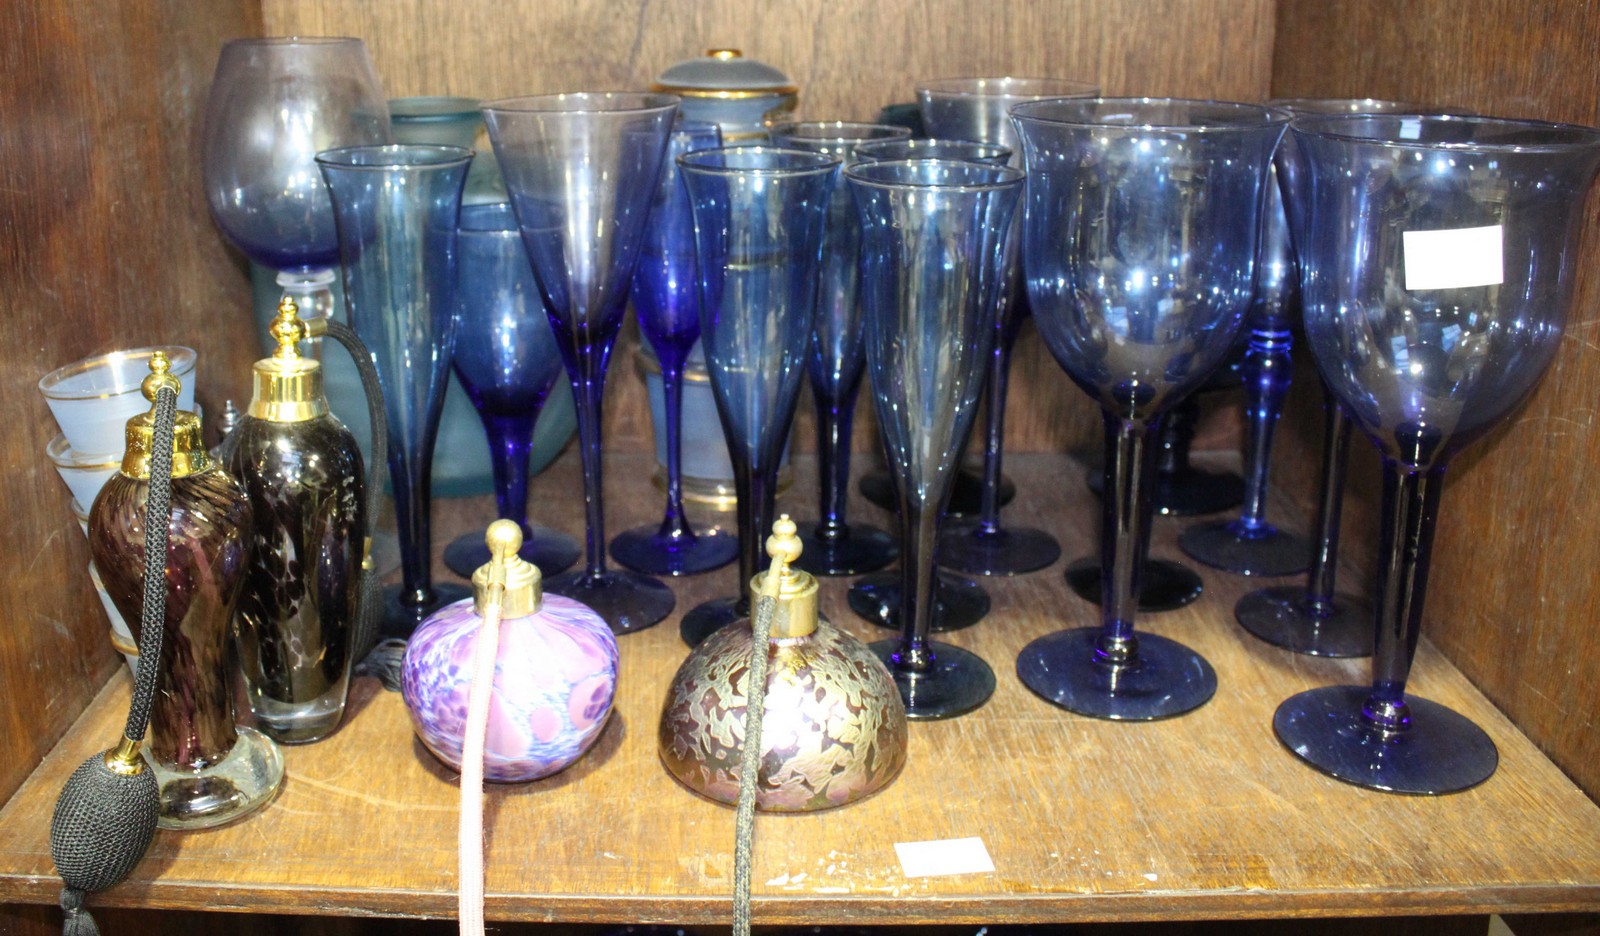 SECTIONS 41 & 42. Two shelves of blue glasswares including glasses, bowls, trinket dishes, perfume - Image 2 of 2